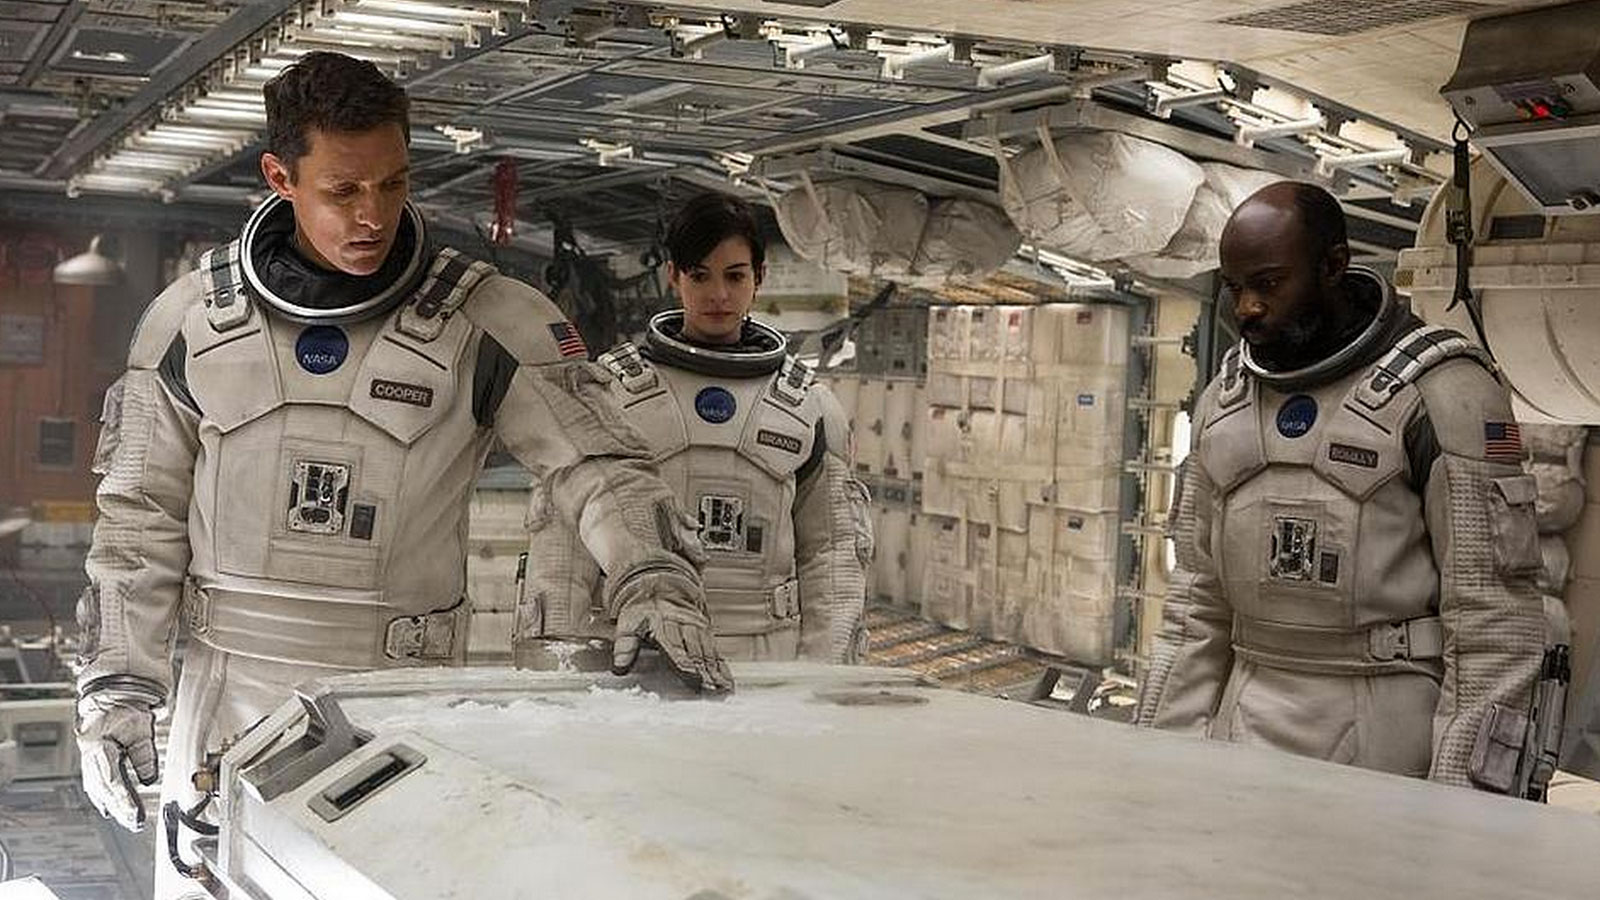 Interstellar” solves climate change by incoherently jetting into space |  Grist